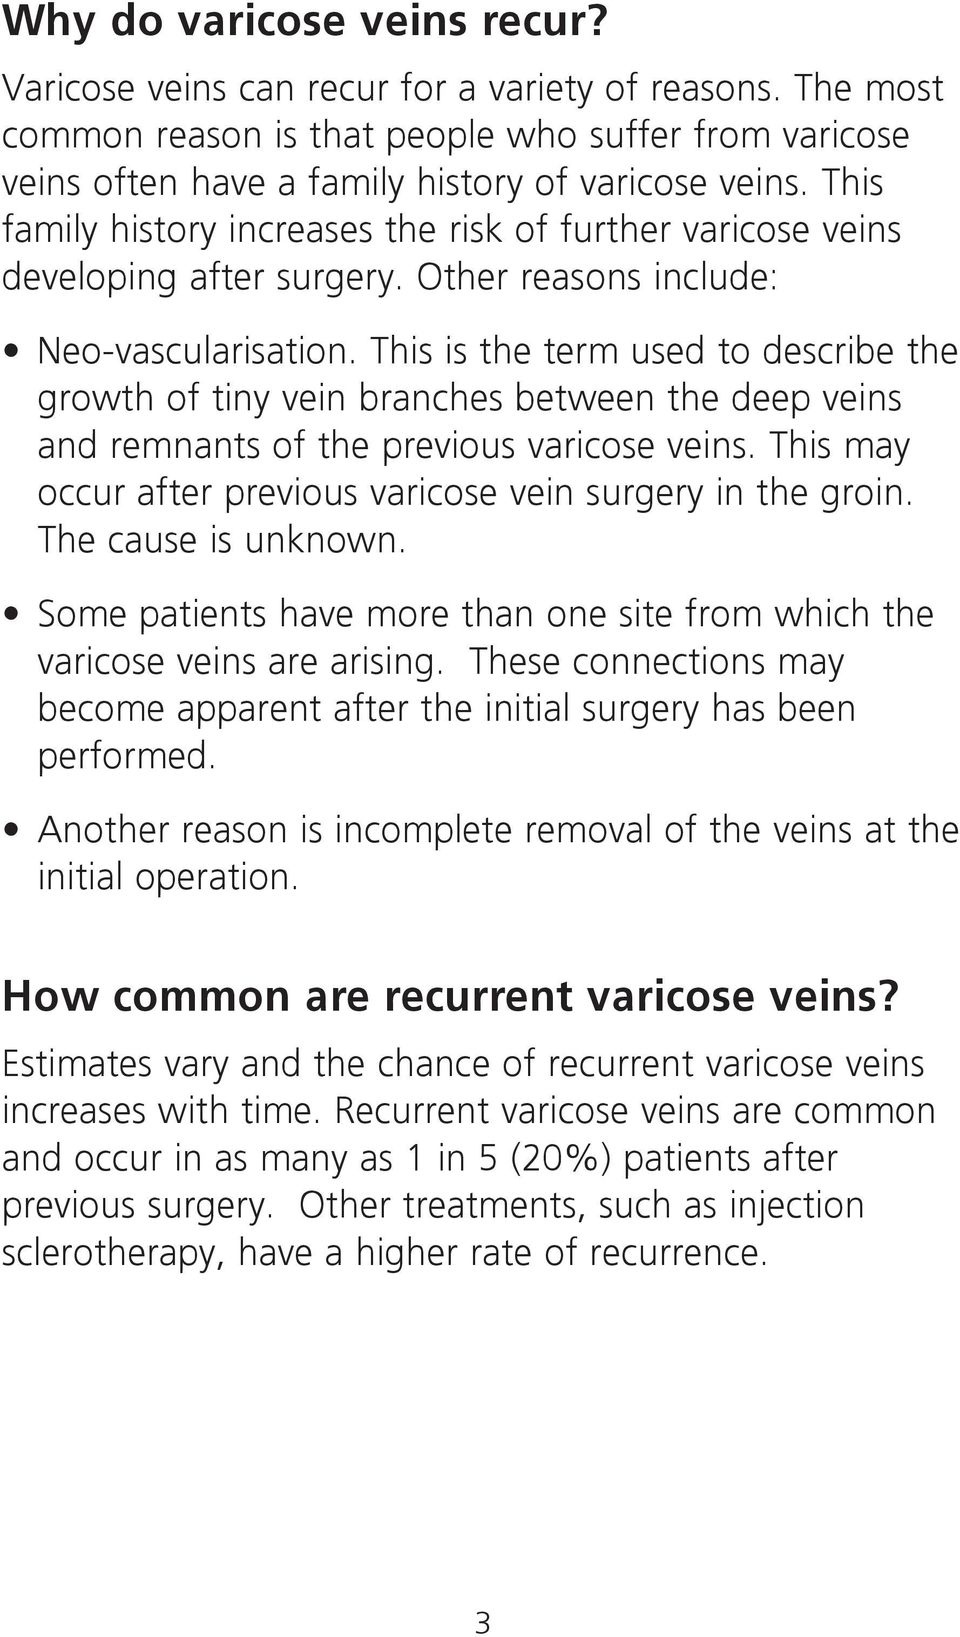 This is the term used to describe the growth of tiny vein branches between the deep veins and remnants of the previous varicose veins. This may occur after previous varicose vein surgery in the groin.